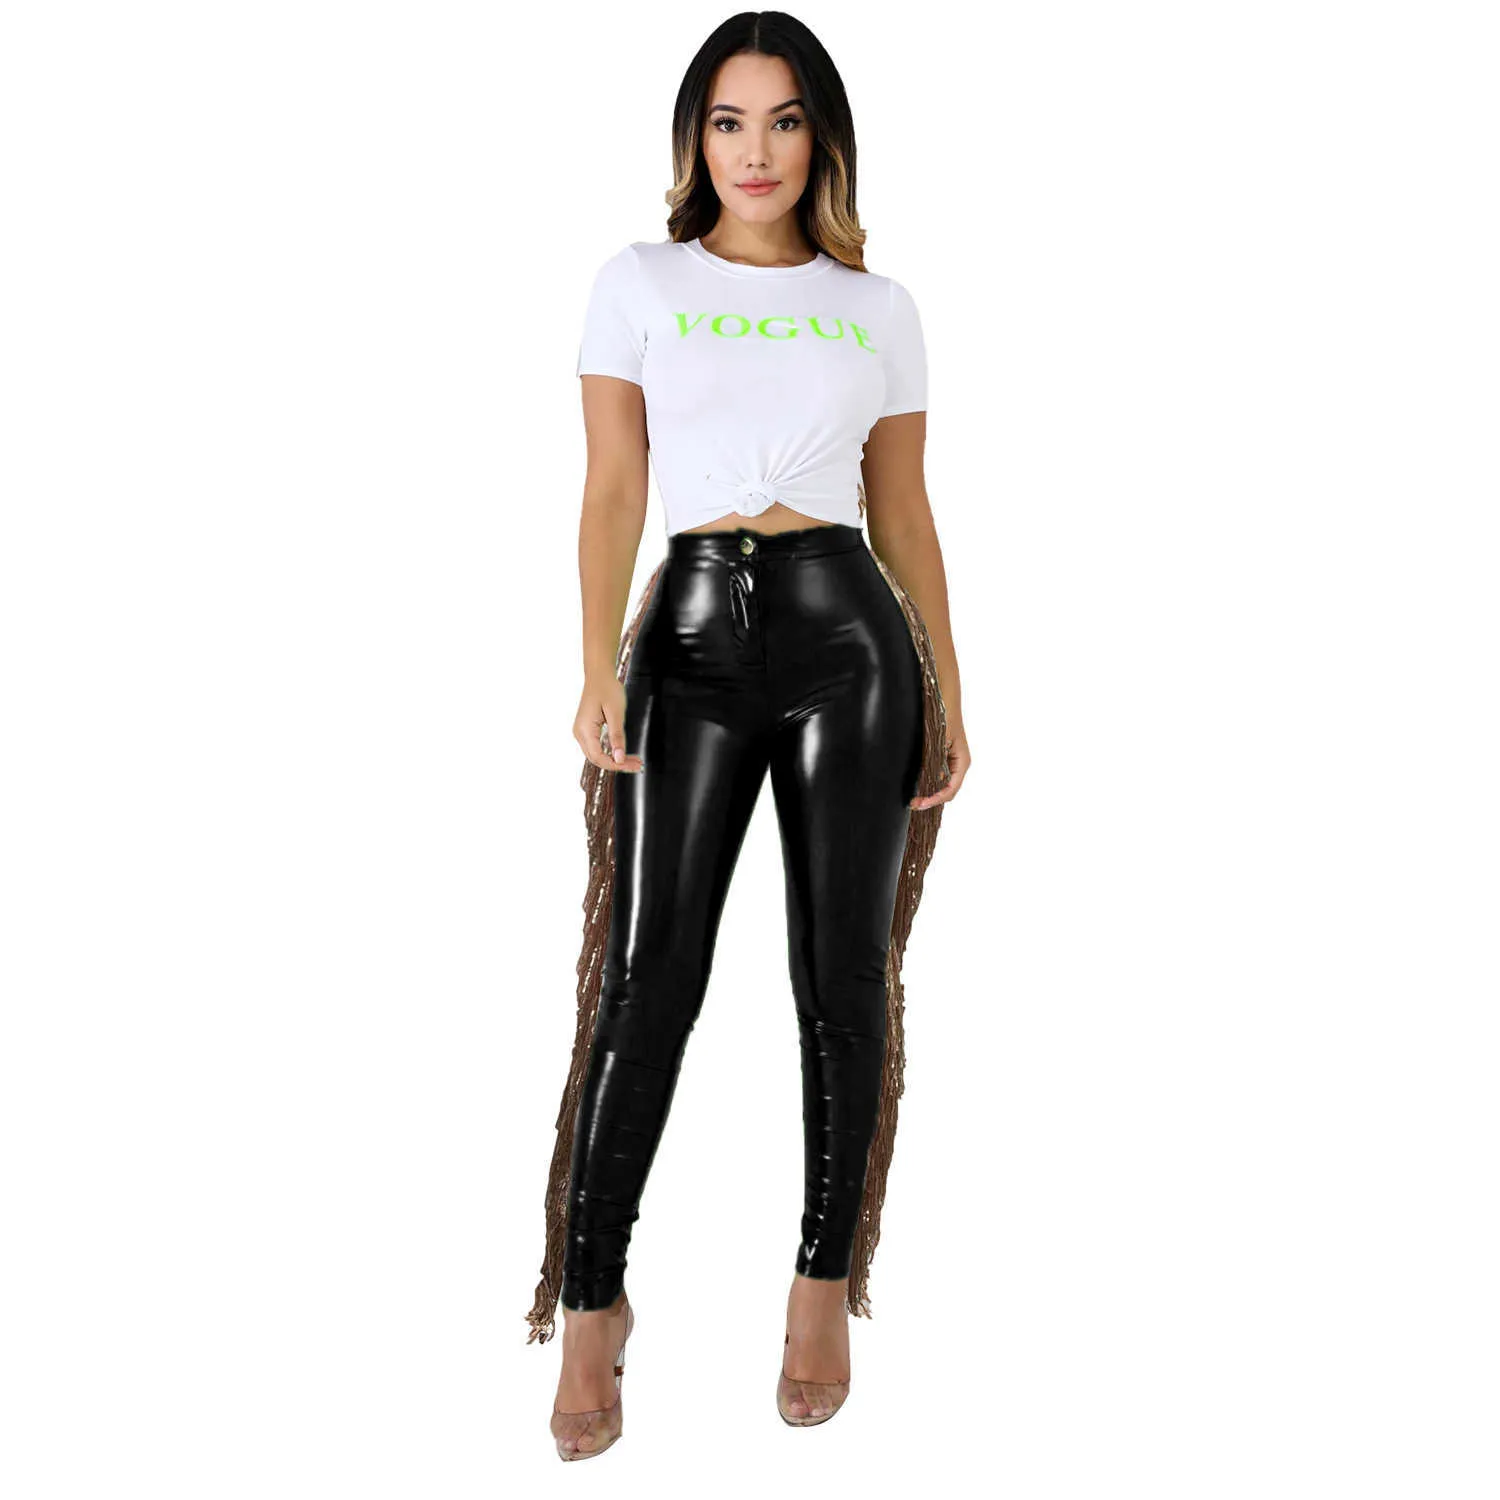 Colysmo PU Leather Pants Sequin Tassel Bodycon Pencil High Waist y2k Trousers Fashion Streetwear Women Party Club Outfits 210527